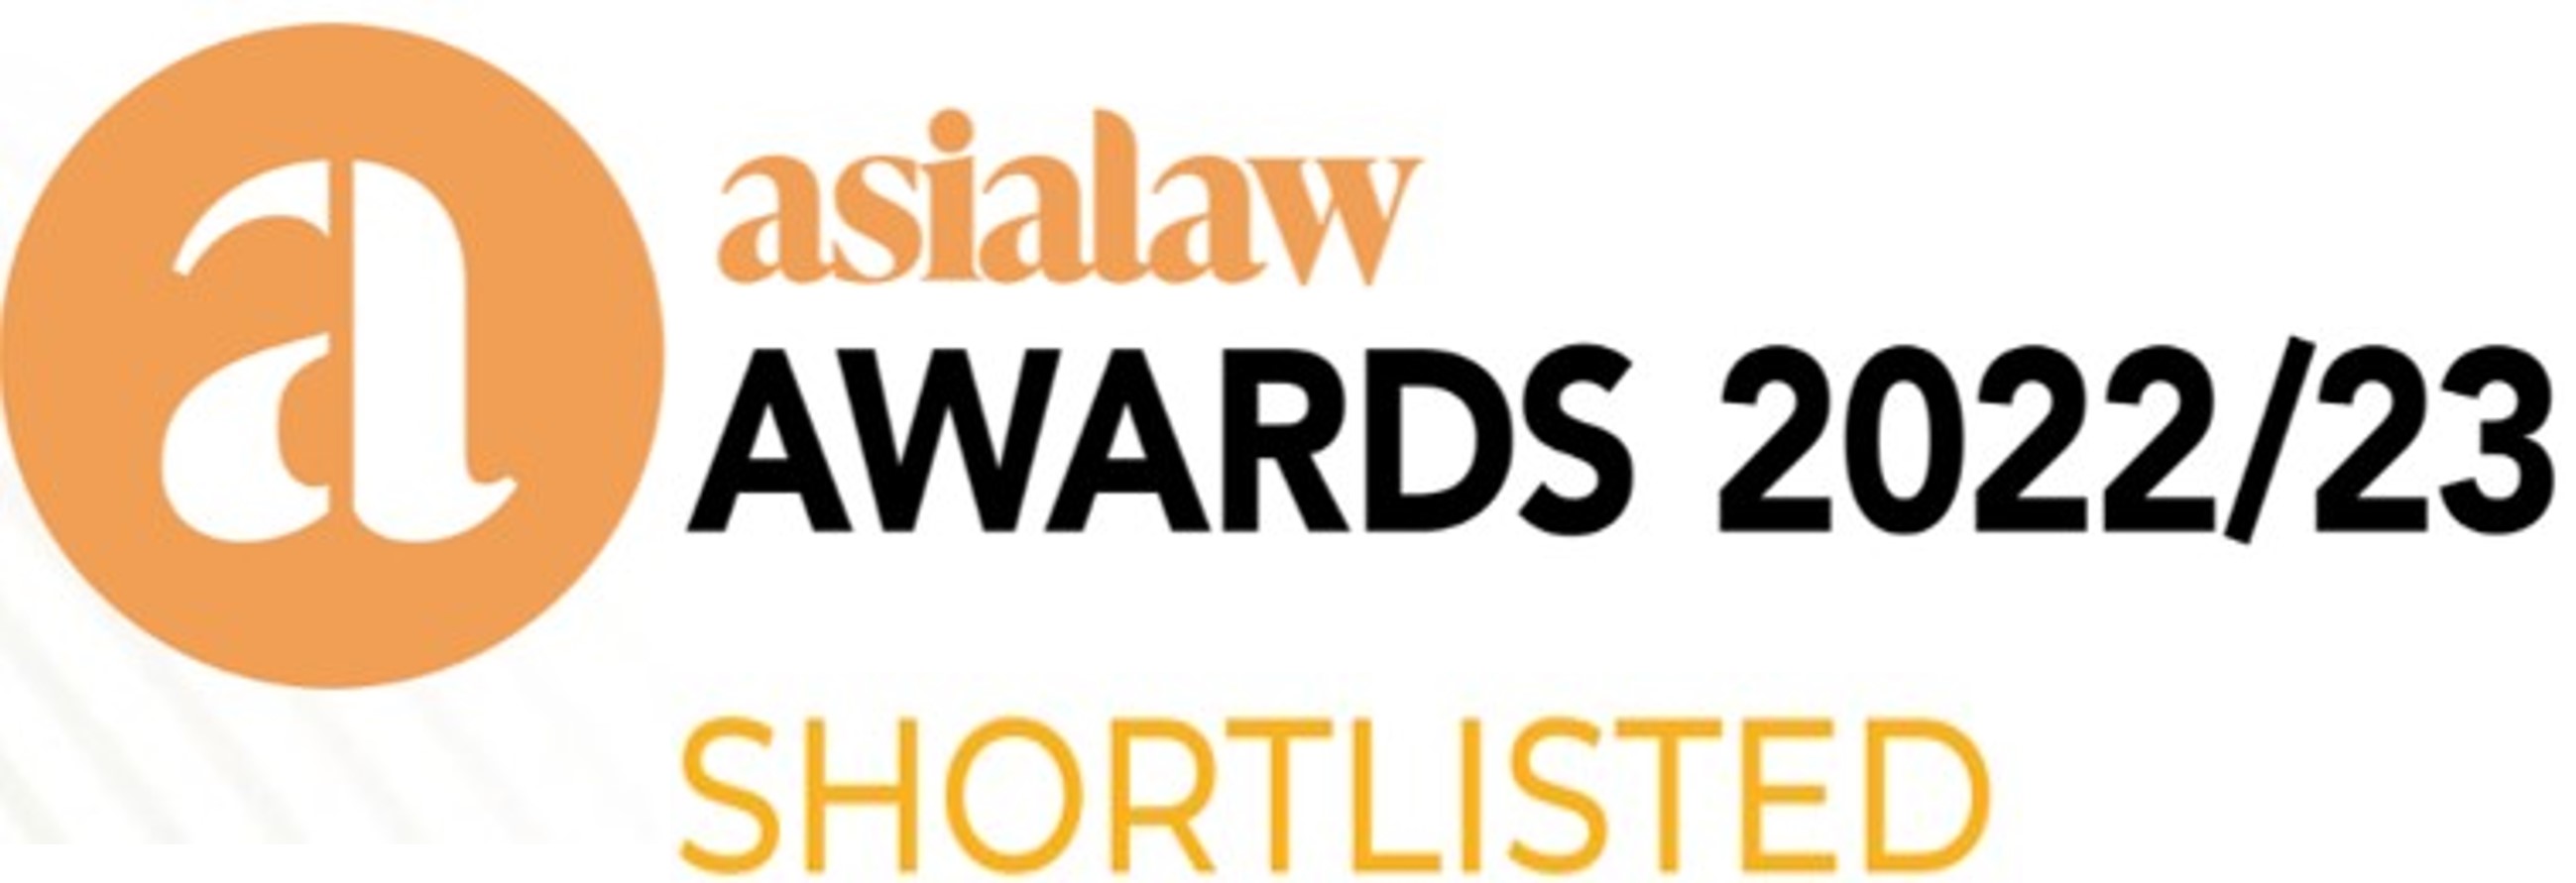 Shortlisted for 'Hong Kong Firm of the Year' in asialaw Awards 2022/23